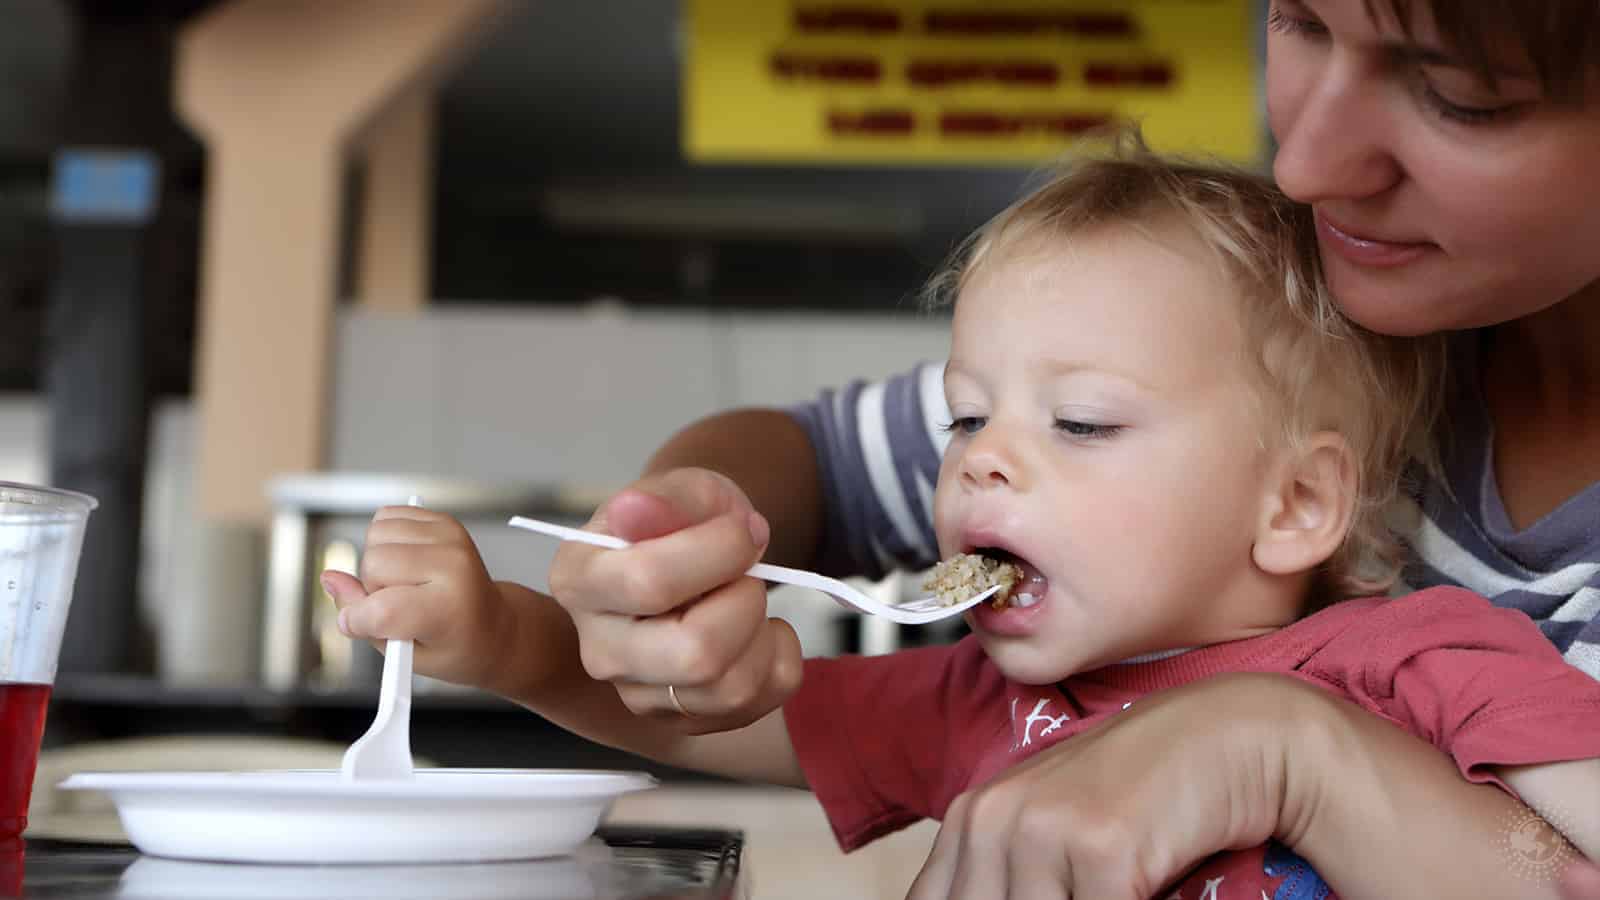 Reports Explain the Reality of Food Insecurity in America Today